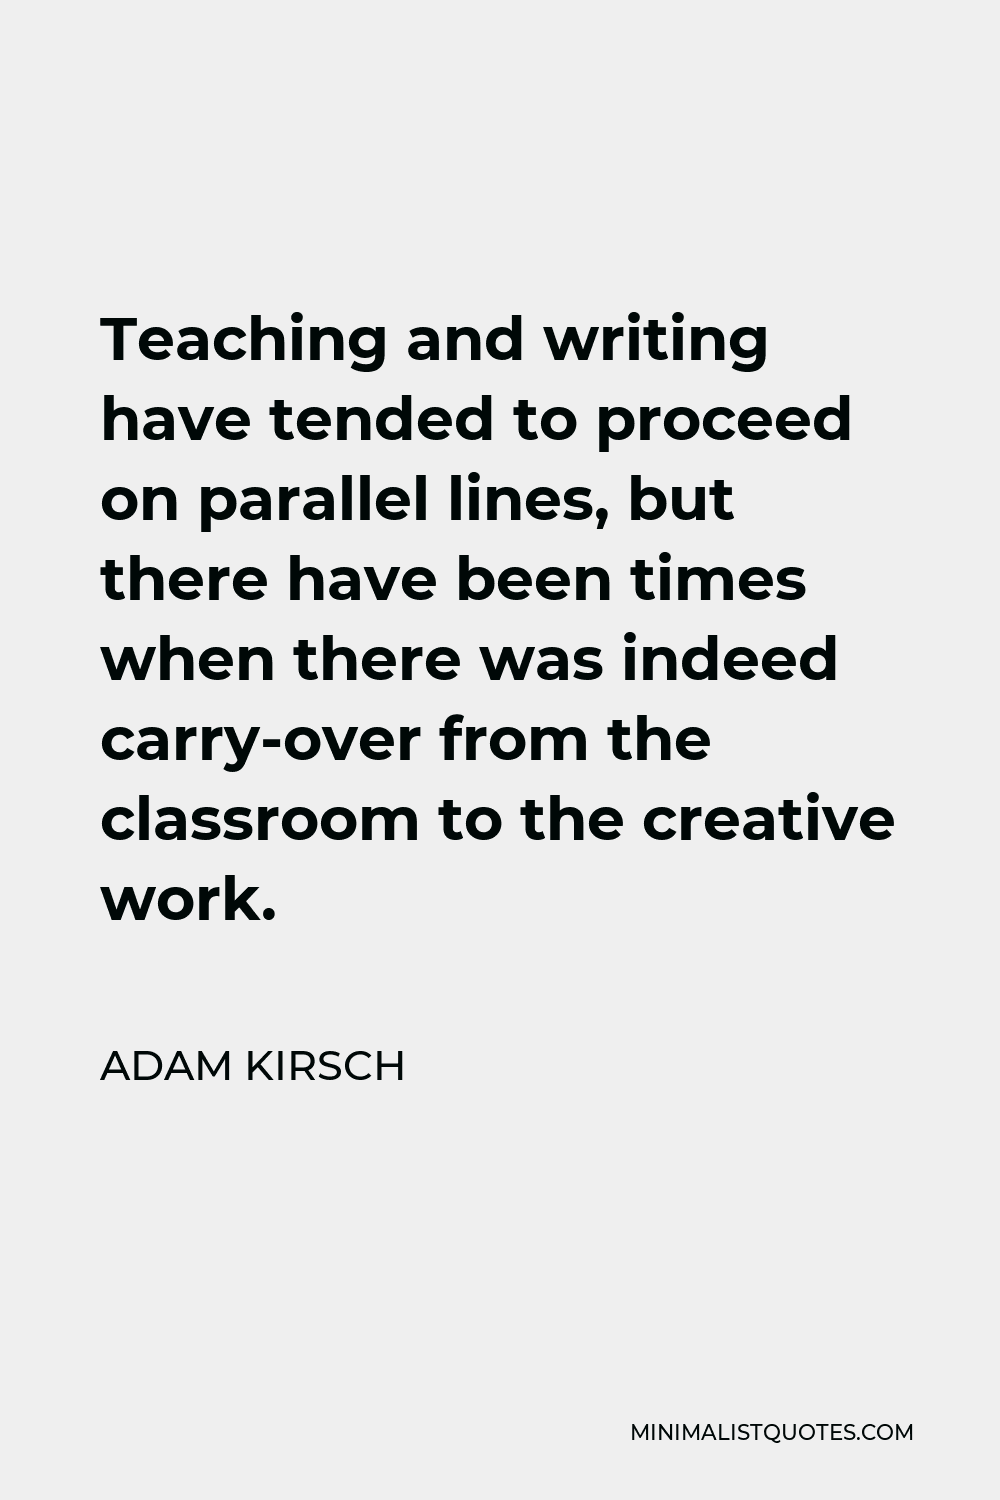 Adam Kirsch Quote - Teaching and writing have tended to proceed on parallel lines, but there have been times when there was indeed carry-over from the classroom to the creative work.